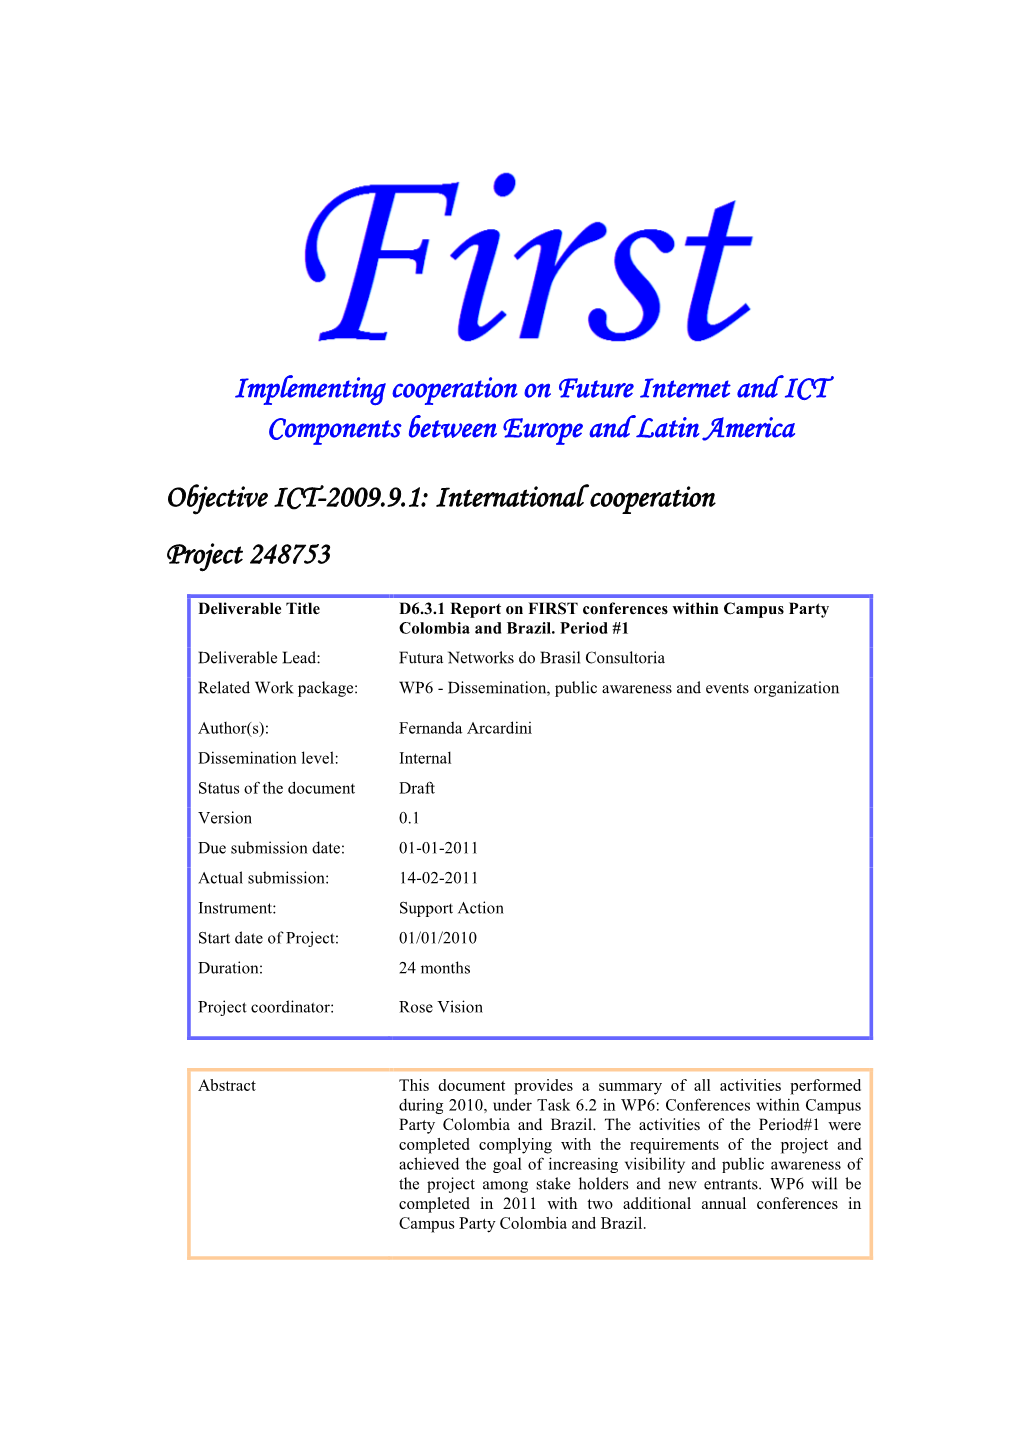 Implementing Cooperation on Future Internet and ICT Components Between Europe and Latin America